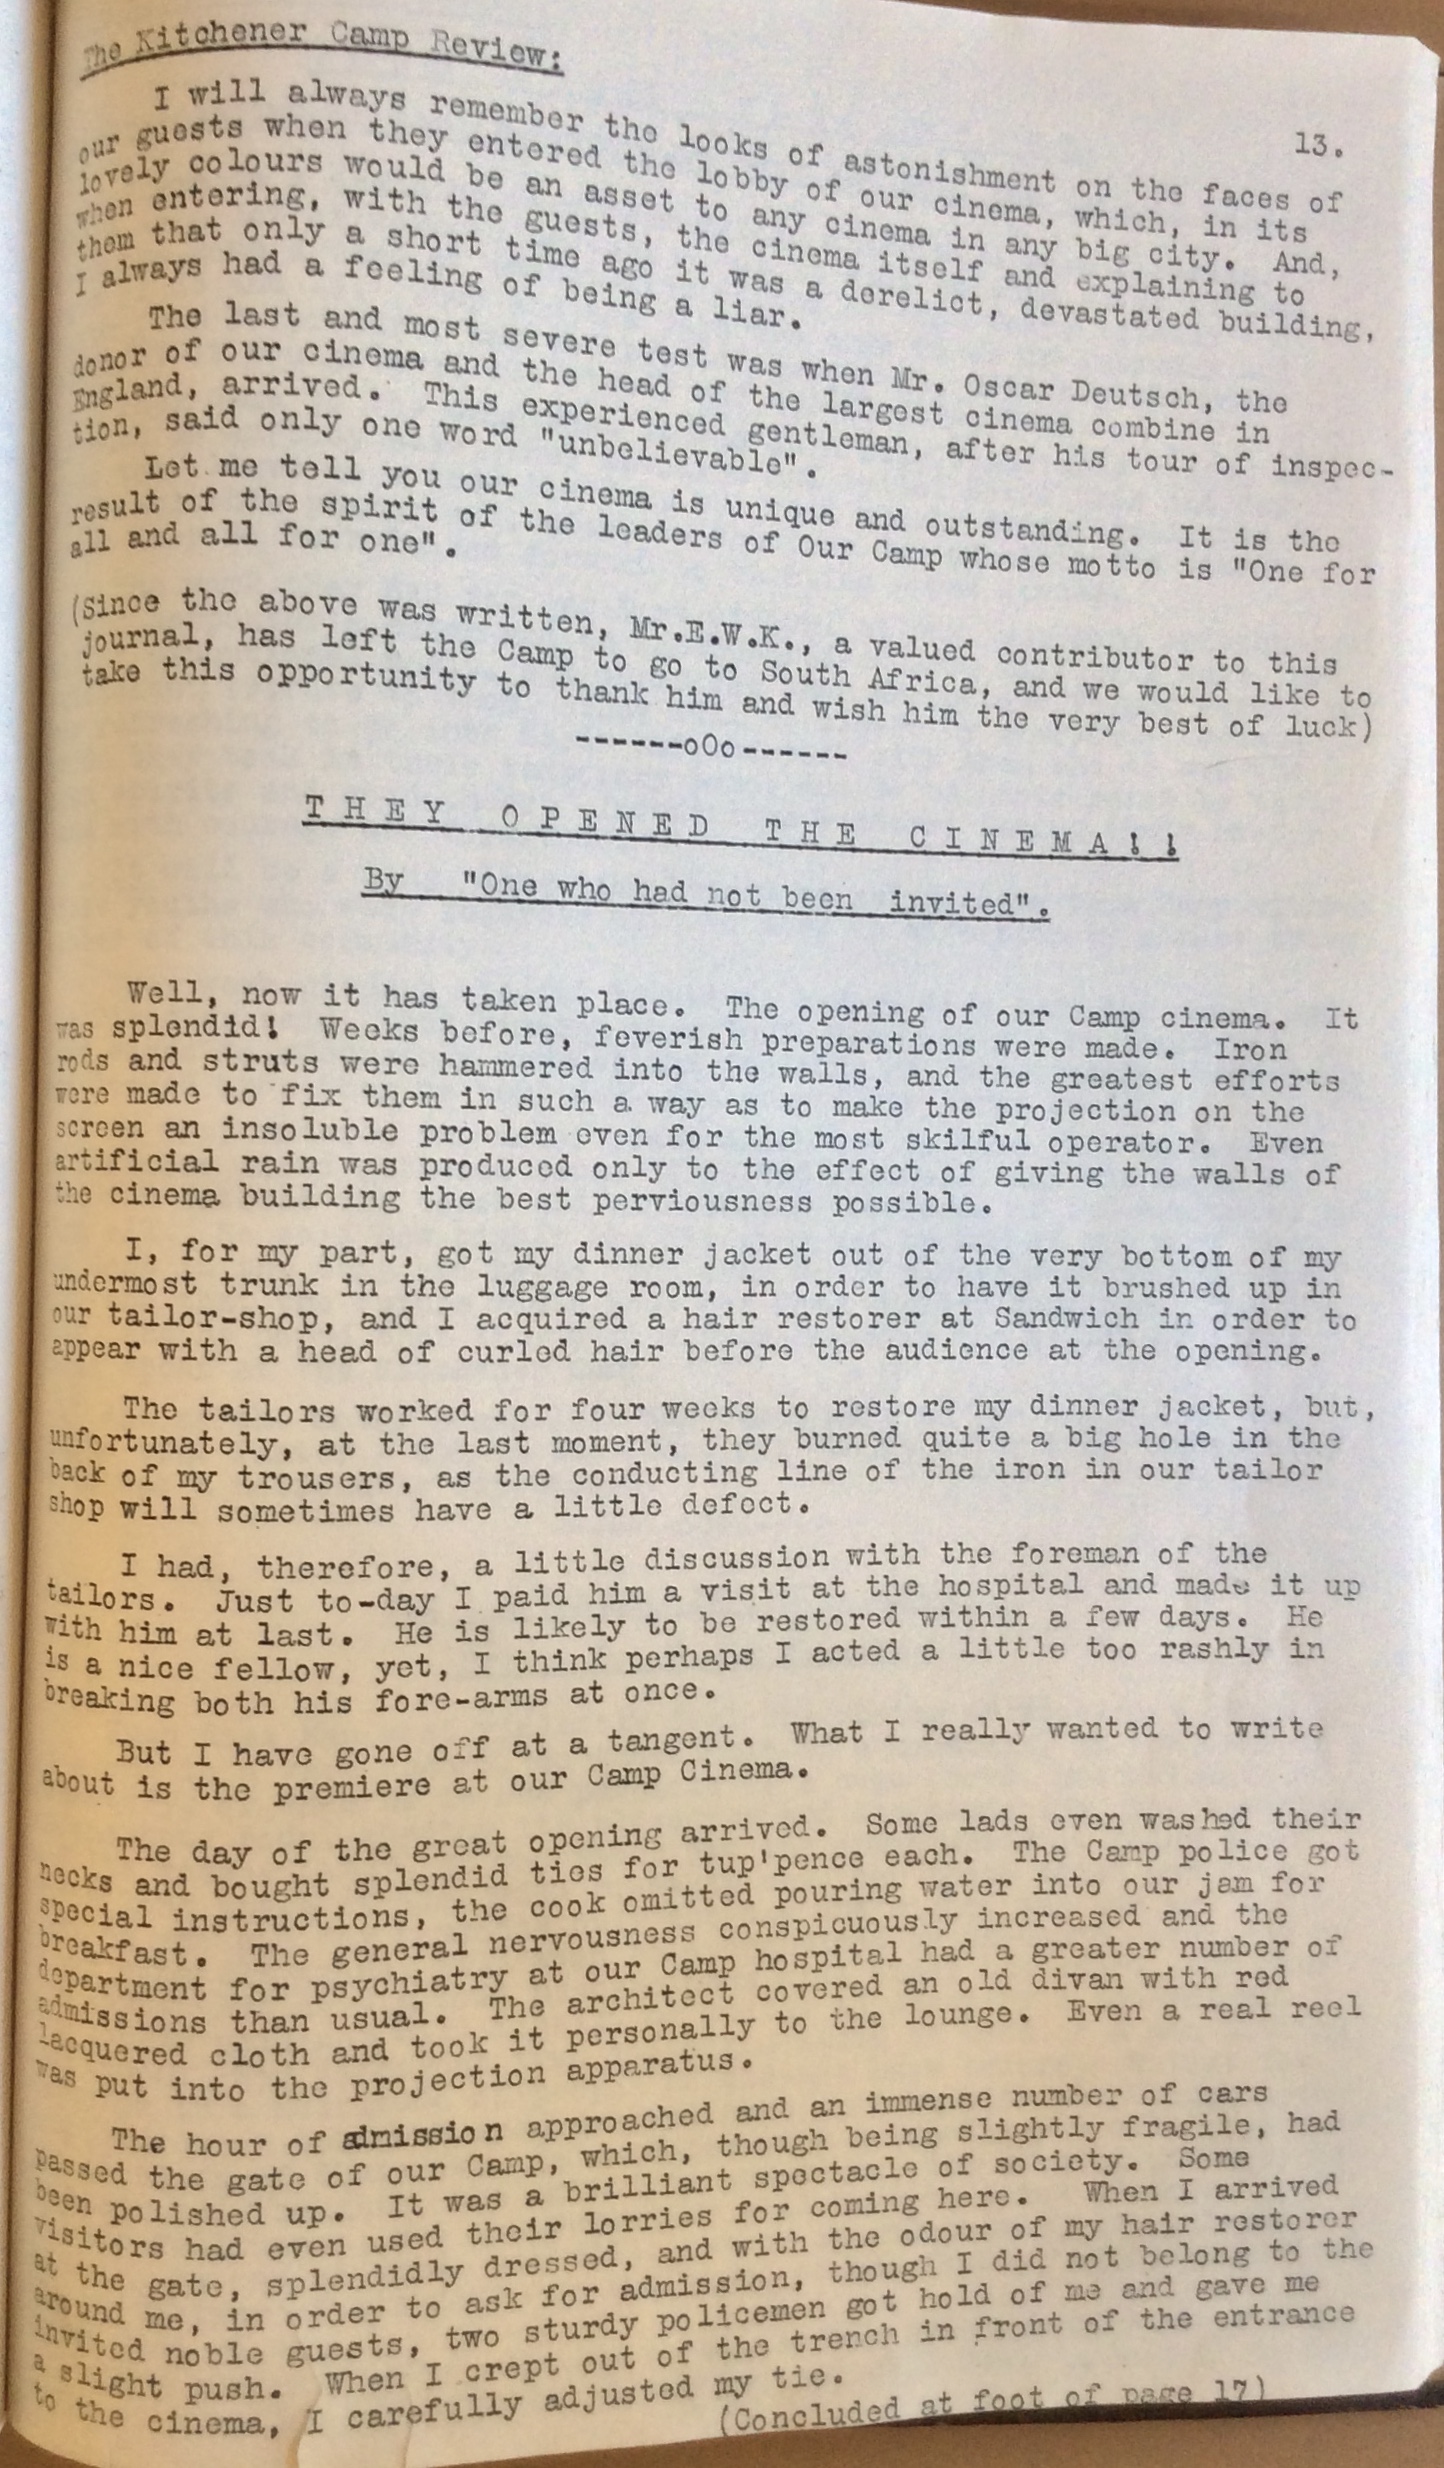 The Kitchener Camp Review, July 1939, No. 5, page 13